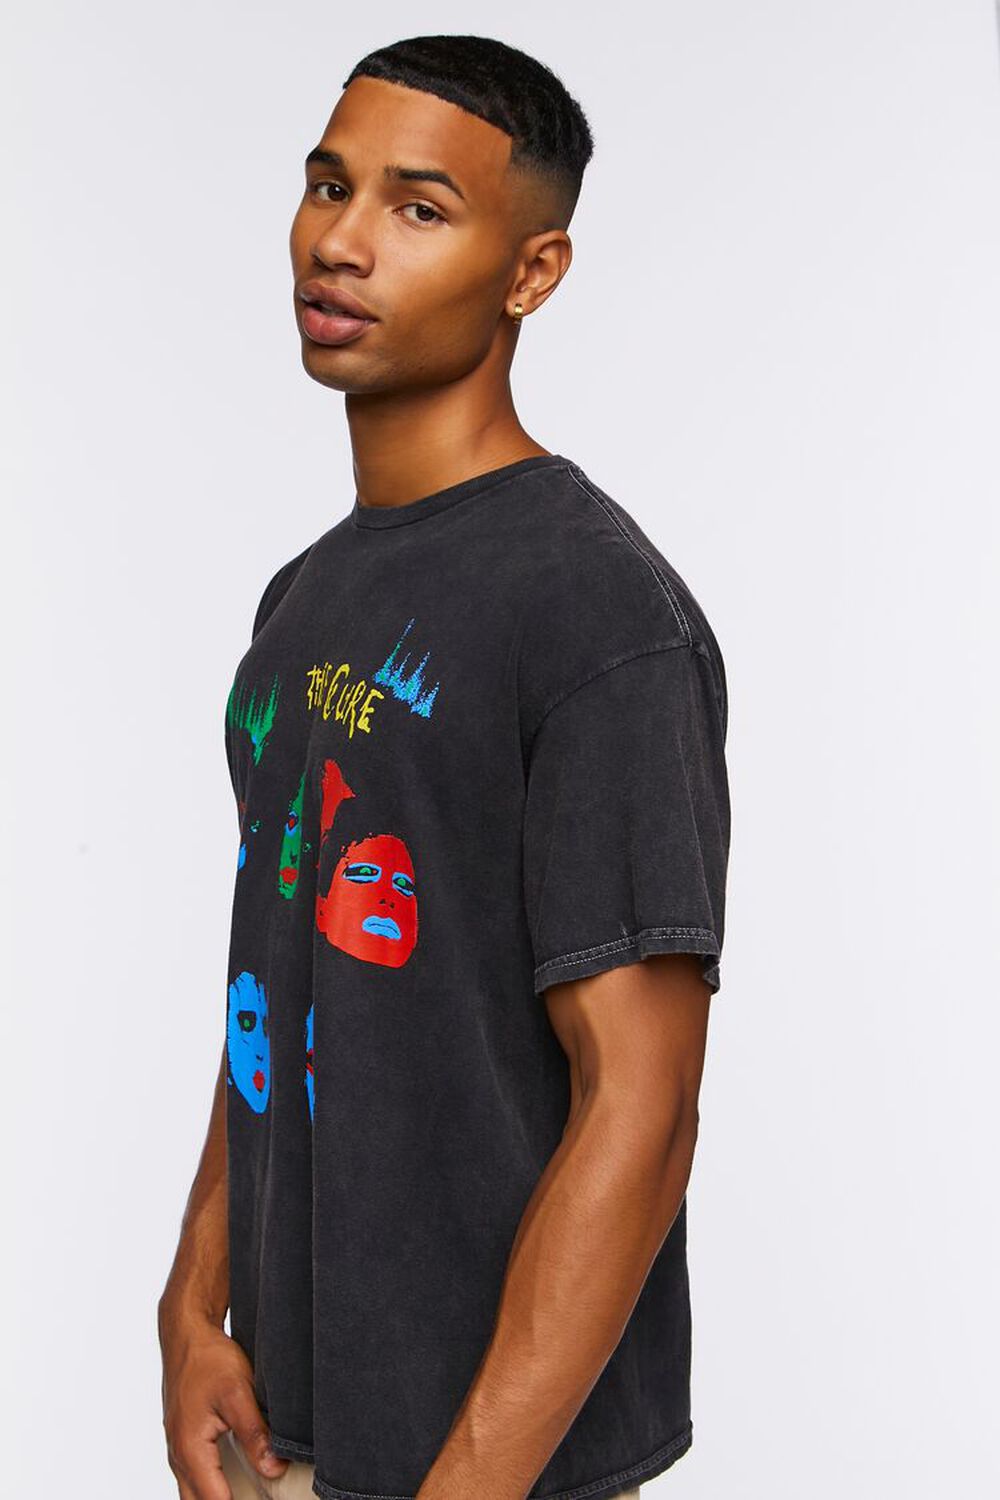 BLACK/MULTI The Cure Graphic Tee, image 2